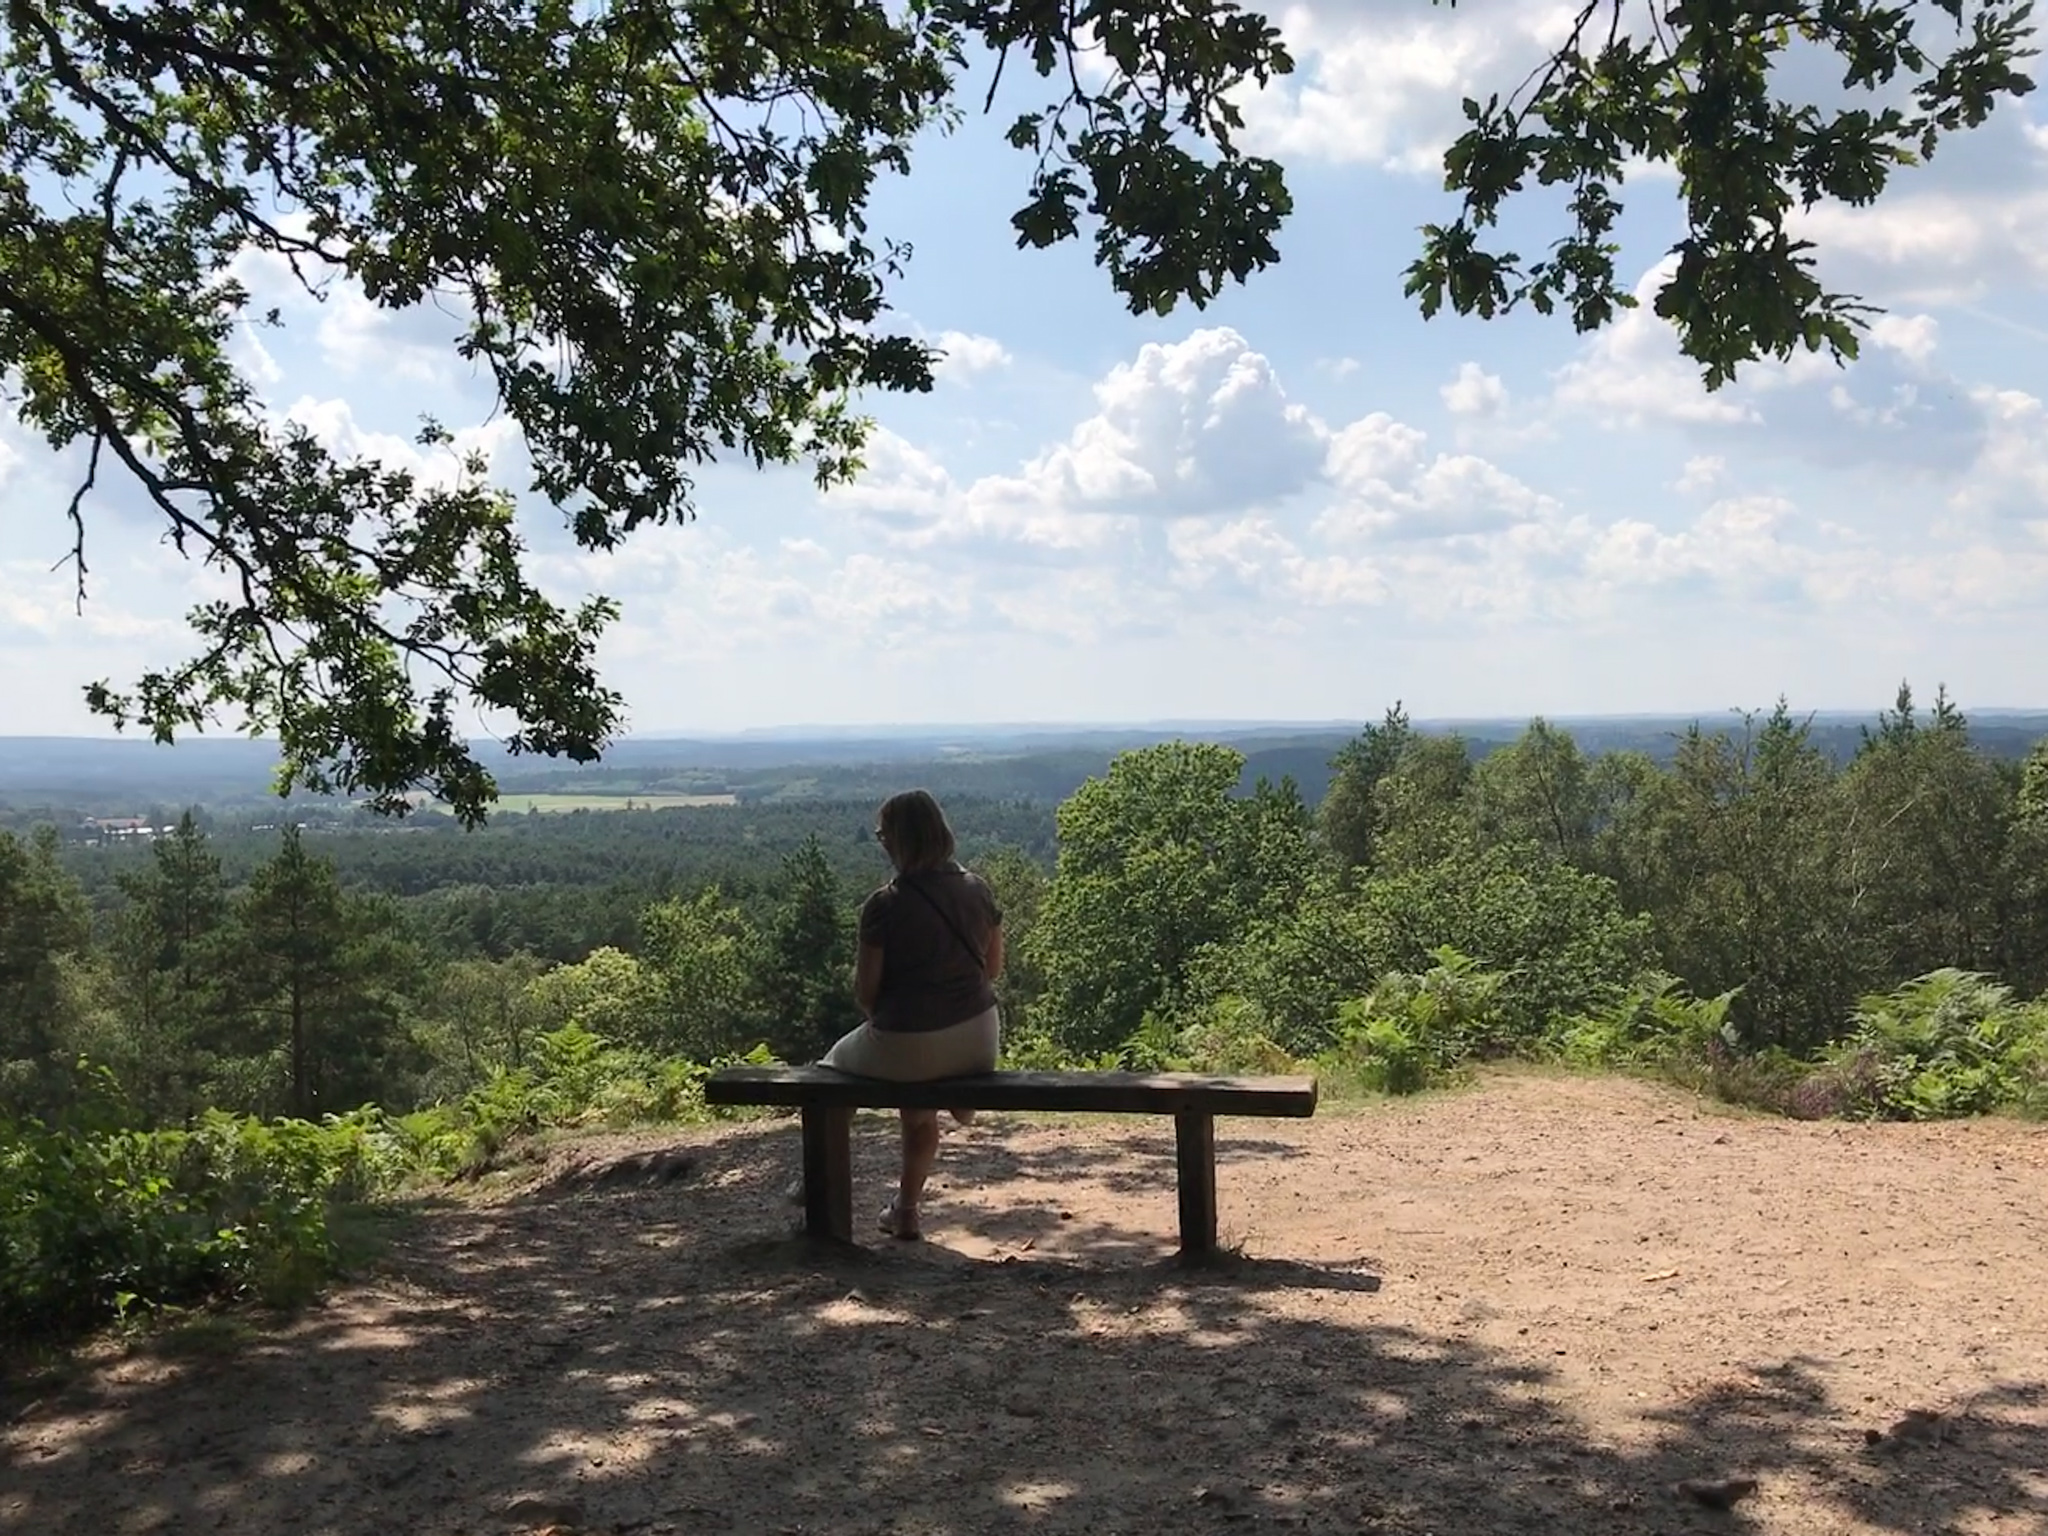 Lady sat on bench at Crooksbury Hill viewpoint, looking out at sunny landscape